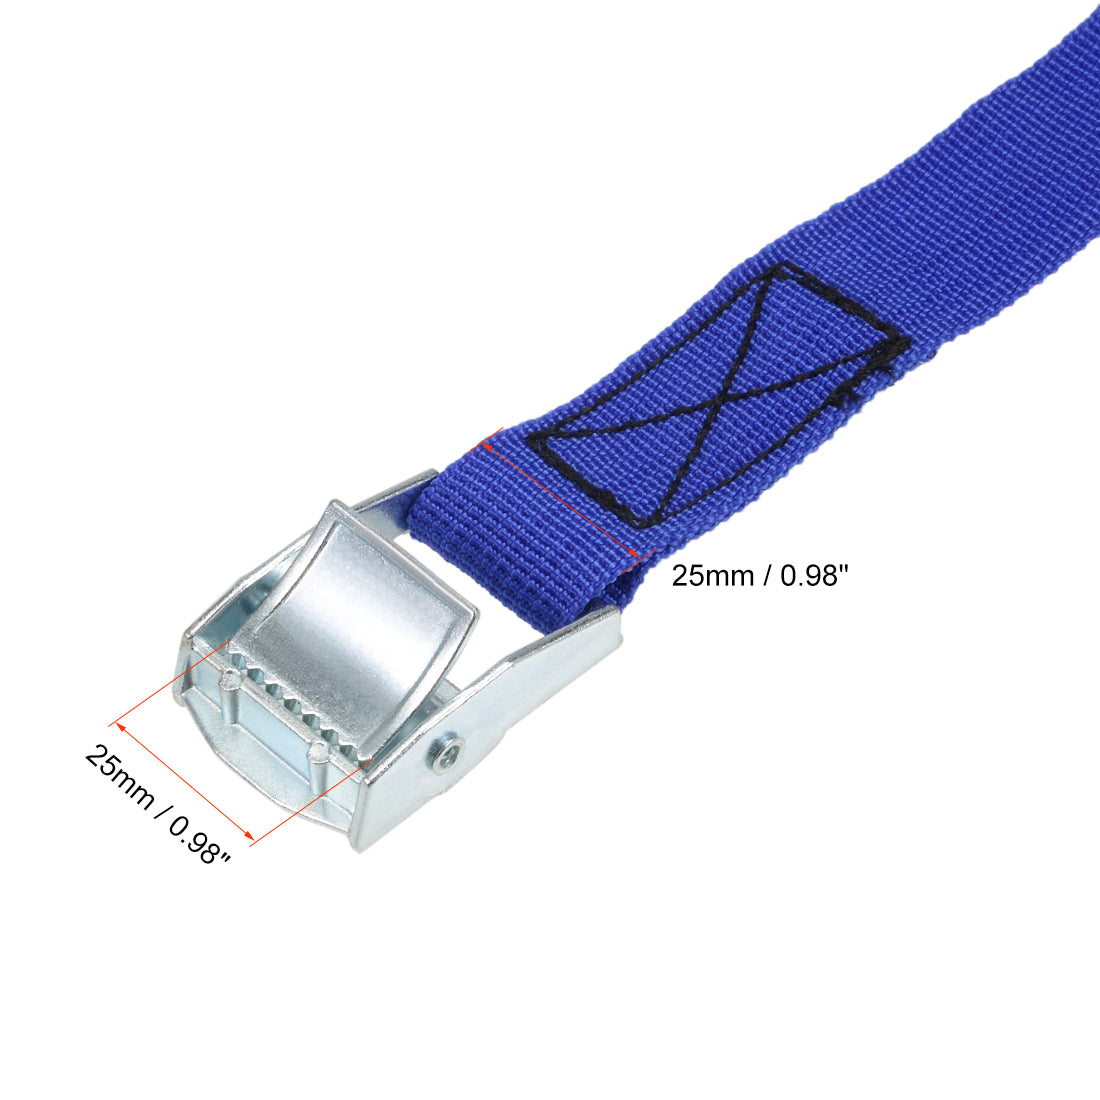 uxcell Uxcell 12M x 25mm Lashing Strap Cargo Tie Down Straps w Cam Lock Buckle 250Kg Work Load, Blue, 2Pcs